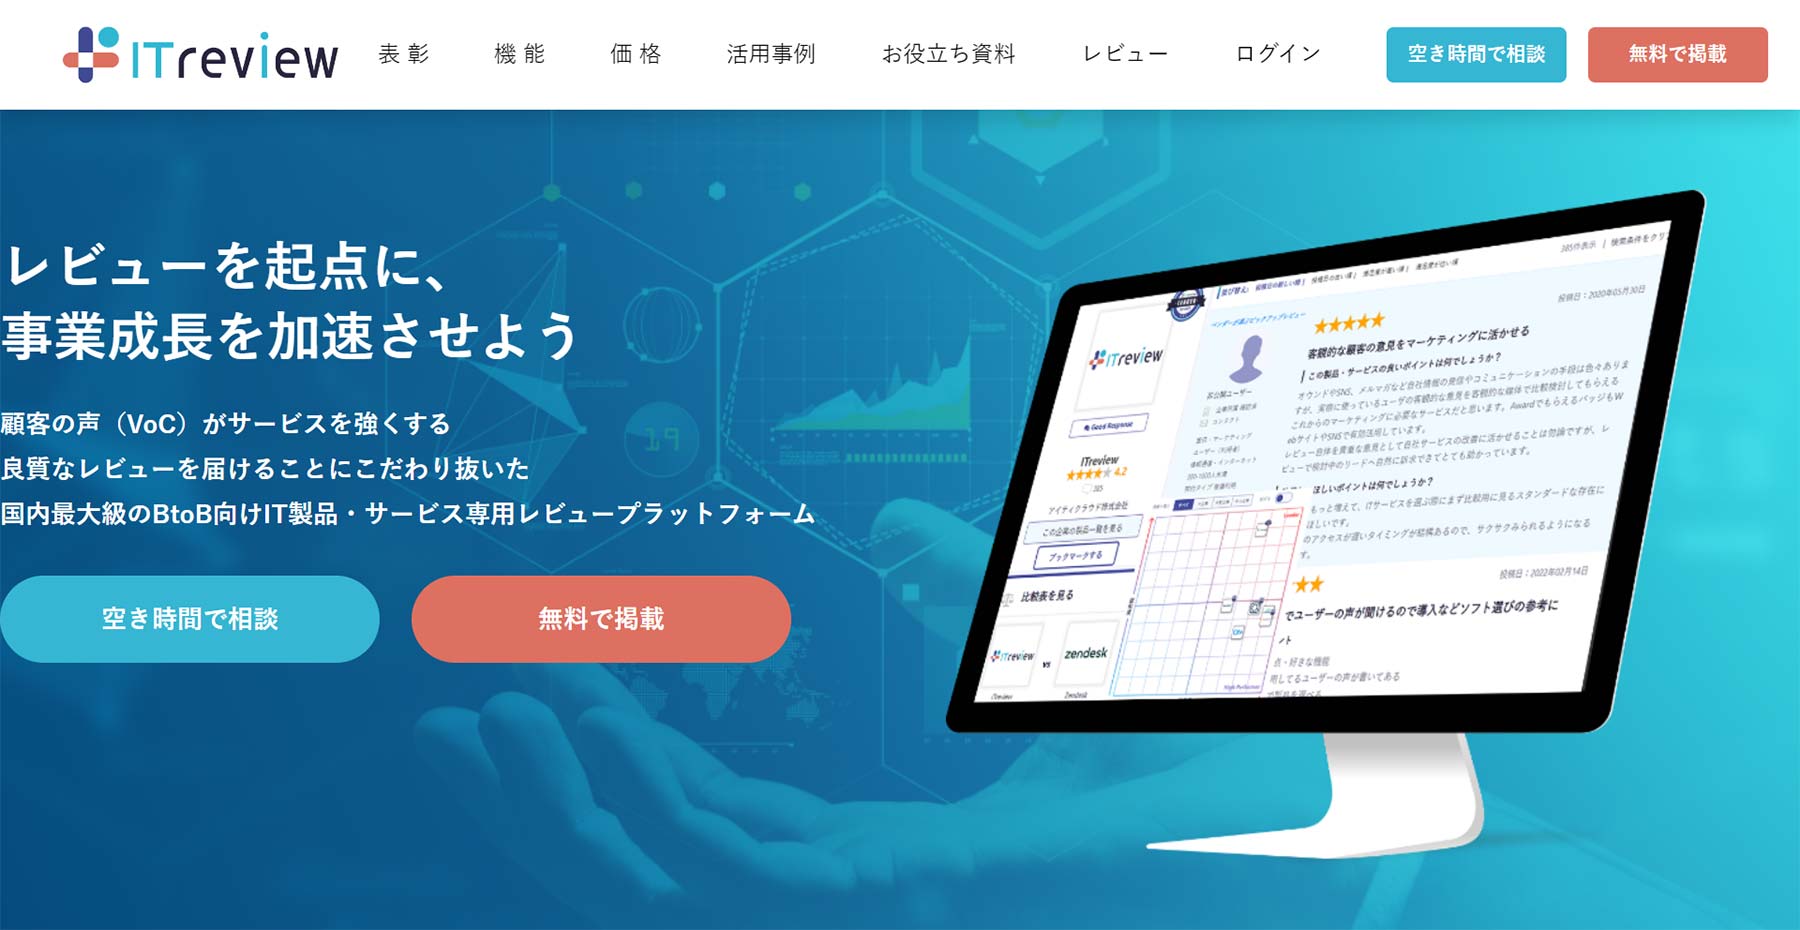 ITreview公式Webサイト